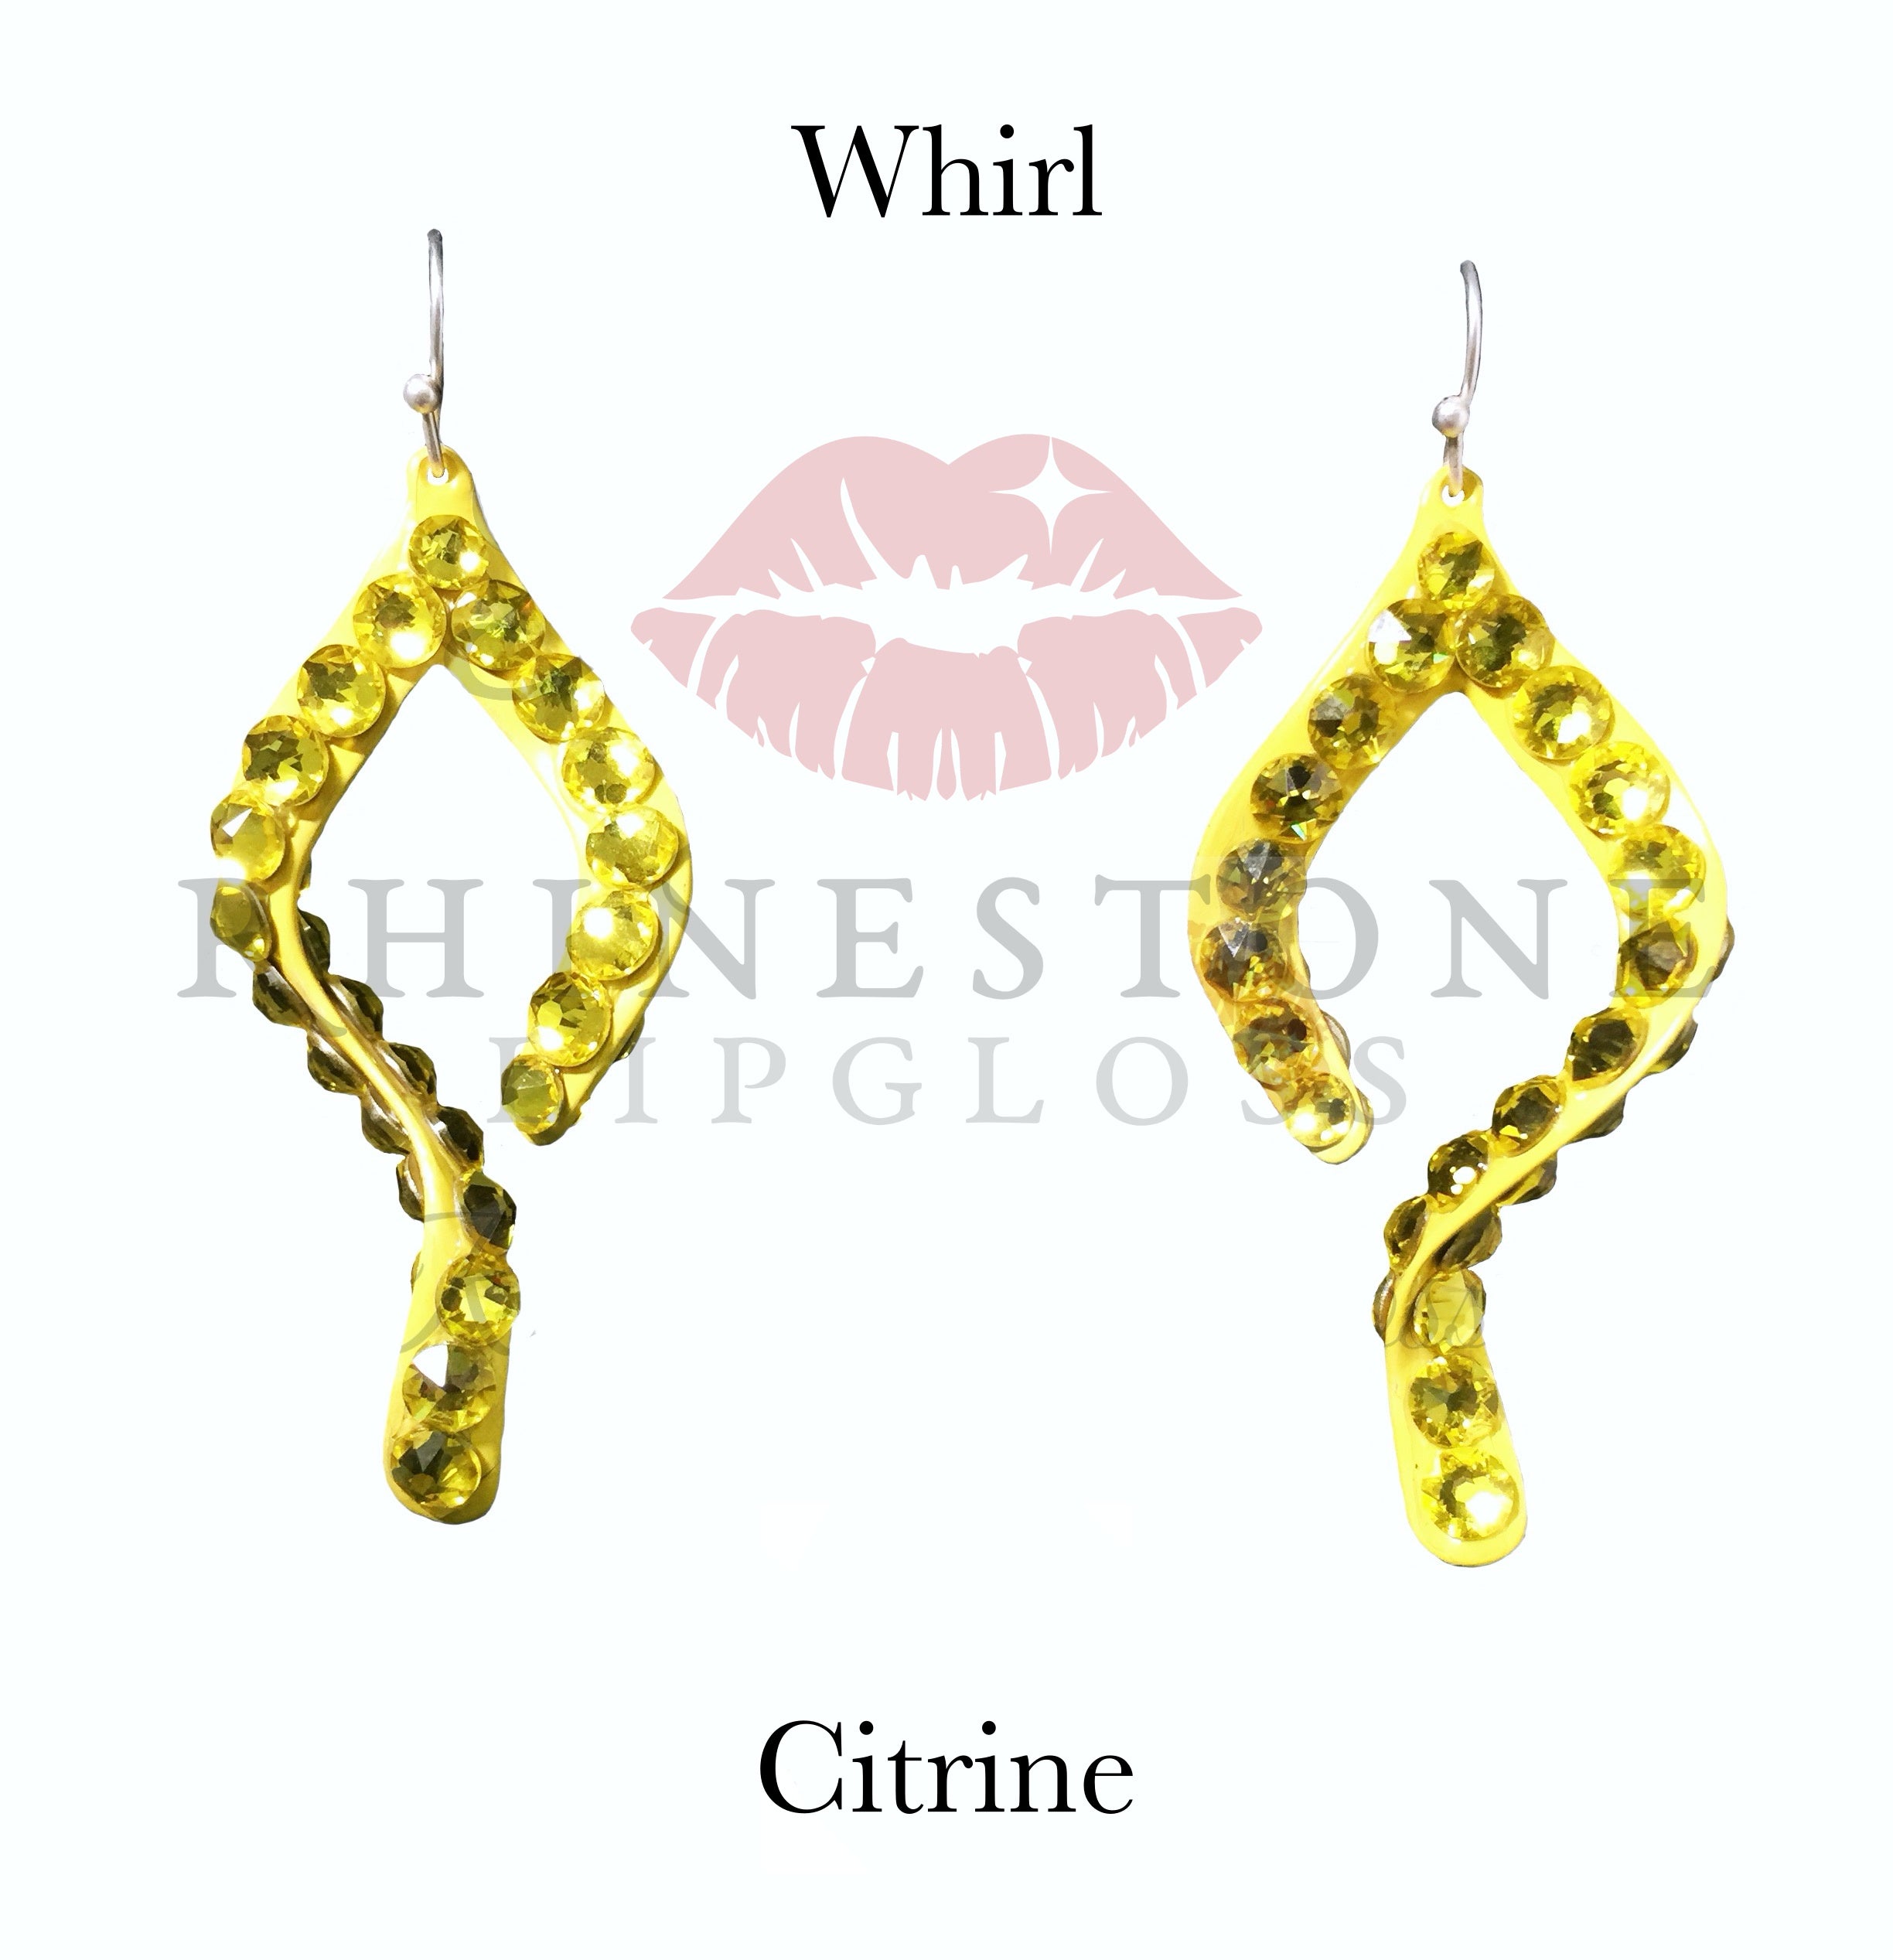 Whirl Exclusive - Citrine